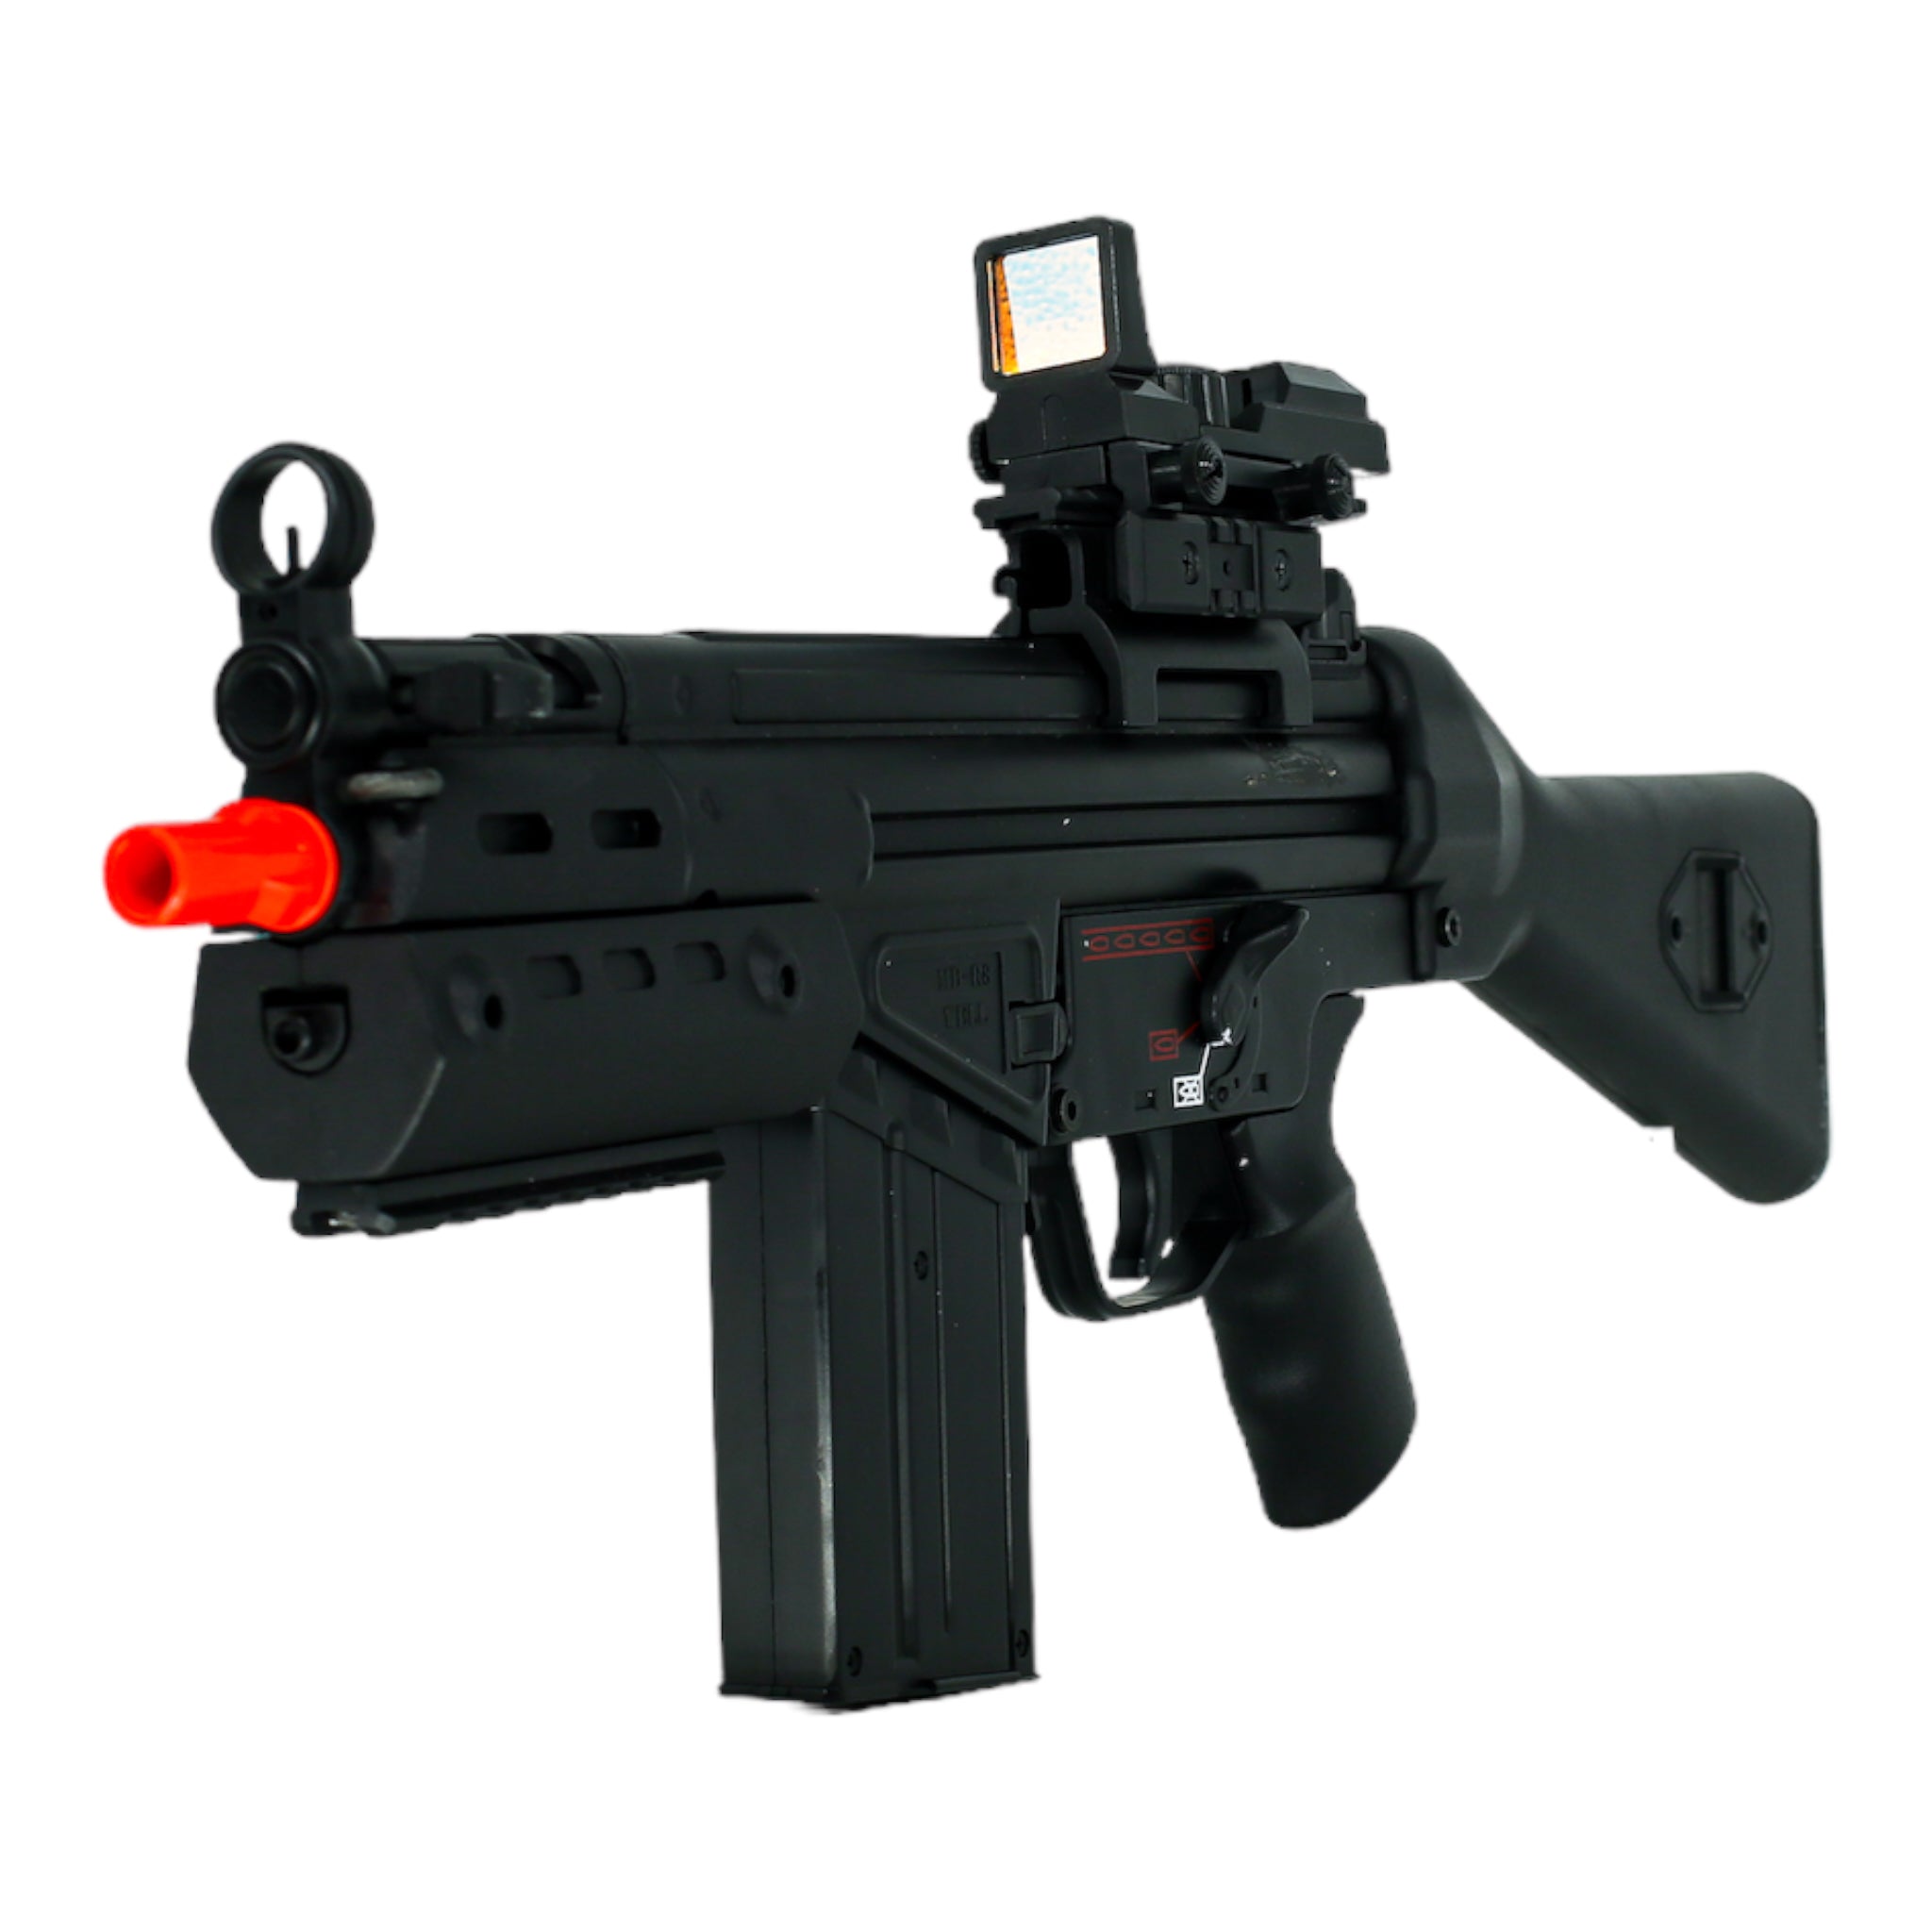 Pre-Owned Wellfire R8 w/ Battery & Scope - ssairsoft.com